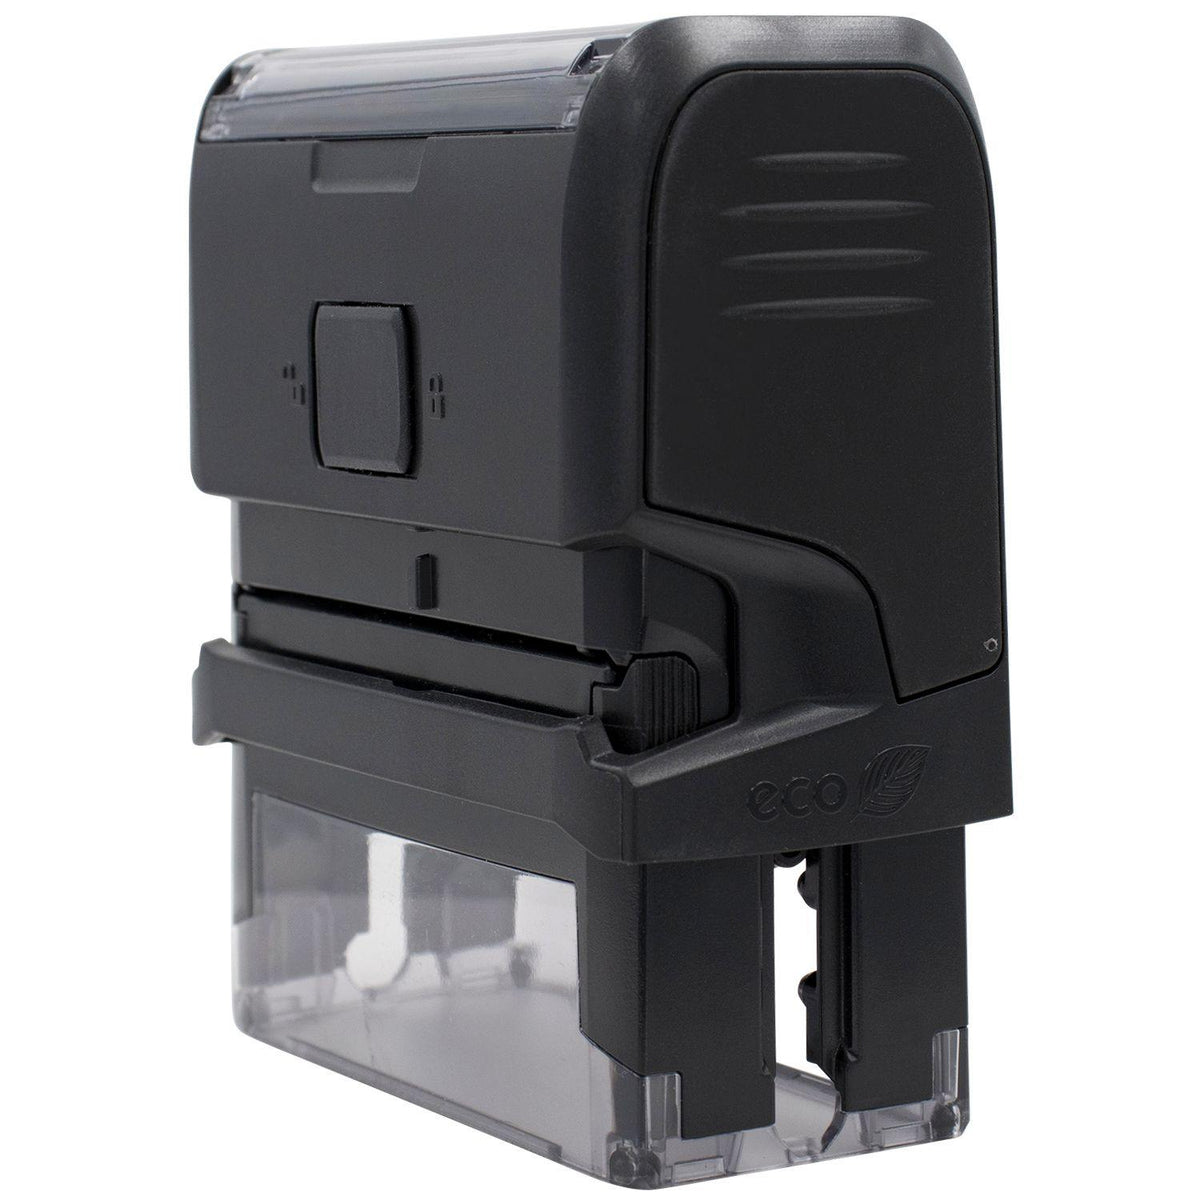 Self-Inking Facturado Stamp - Engineer Seal Stamps - Brand_Trodat, Impression Size_Small, Stamp Type_Self-Inking Stamp, Type of Use_Finance, Type of Use_Office